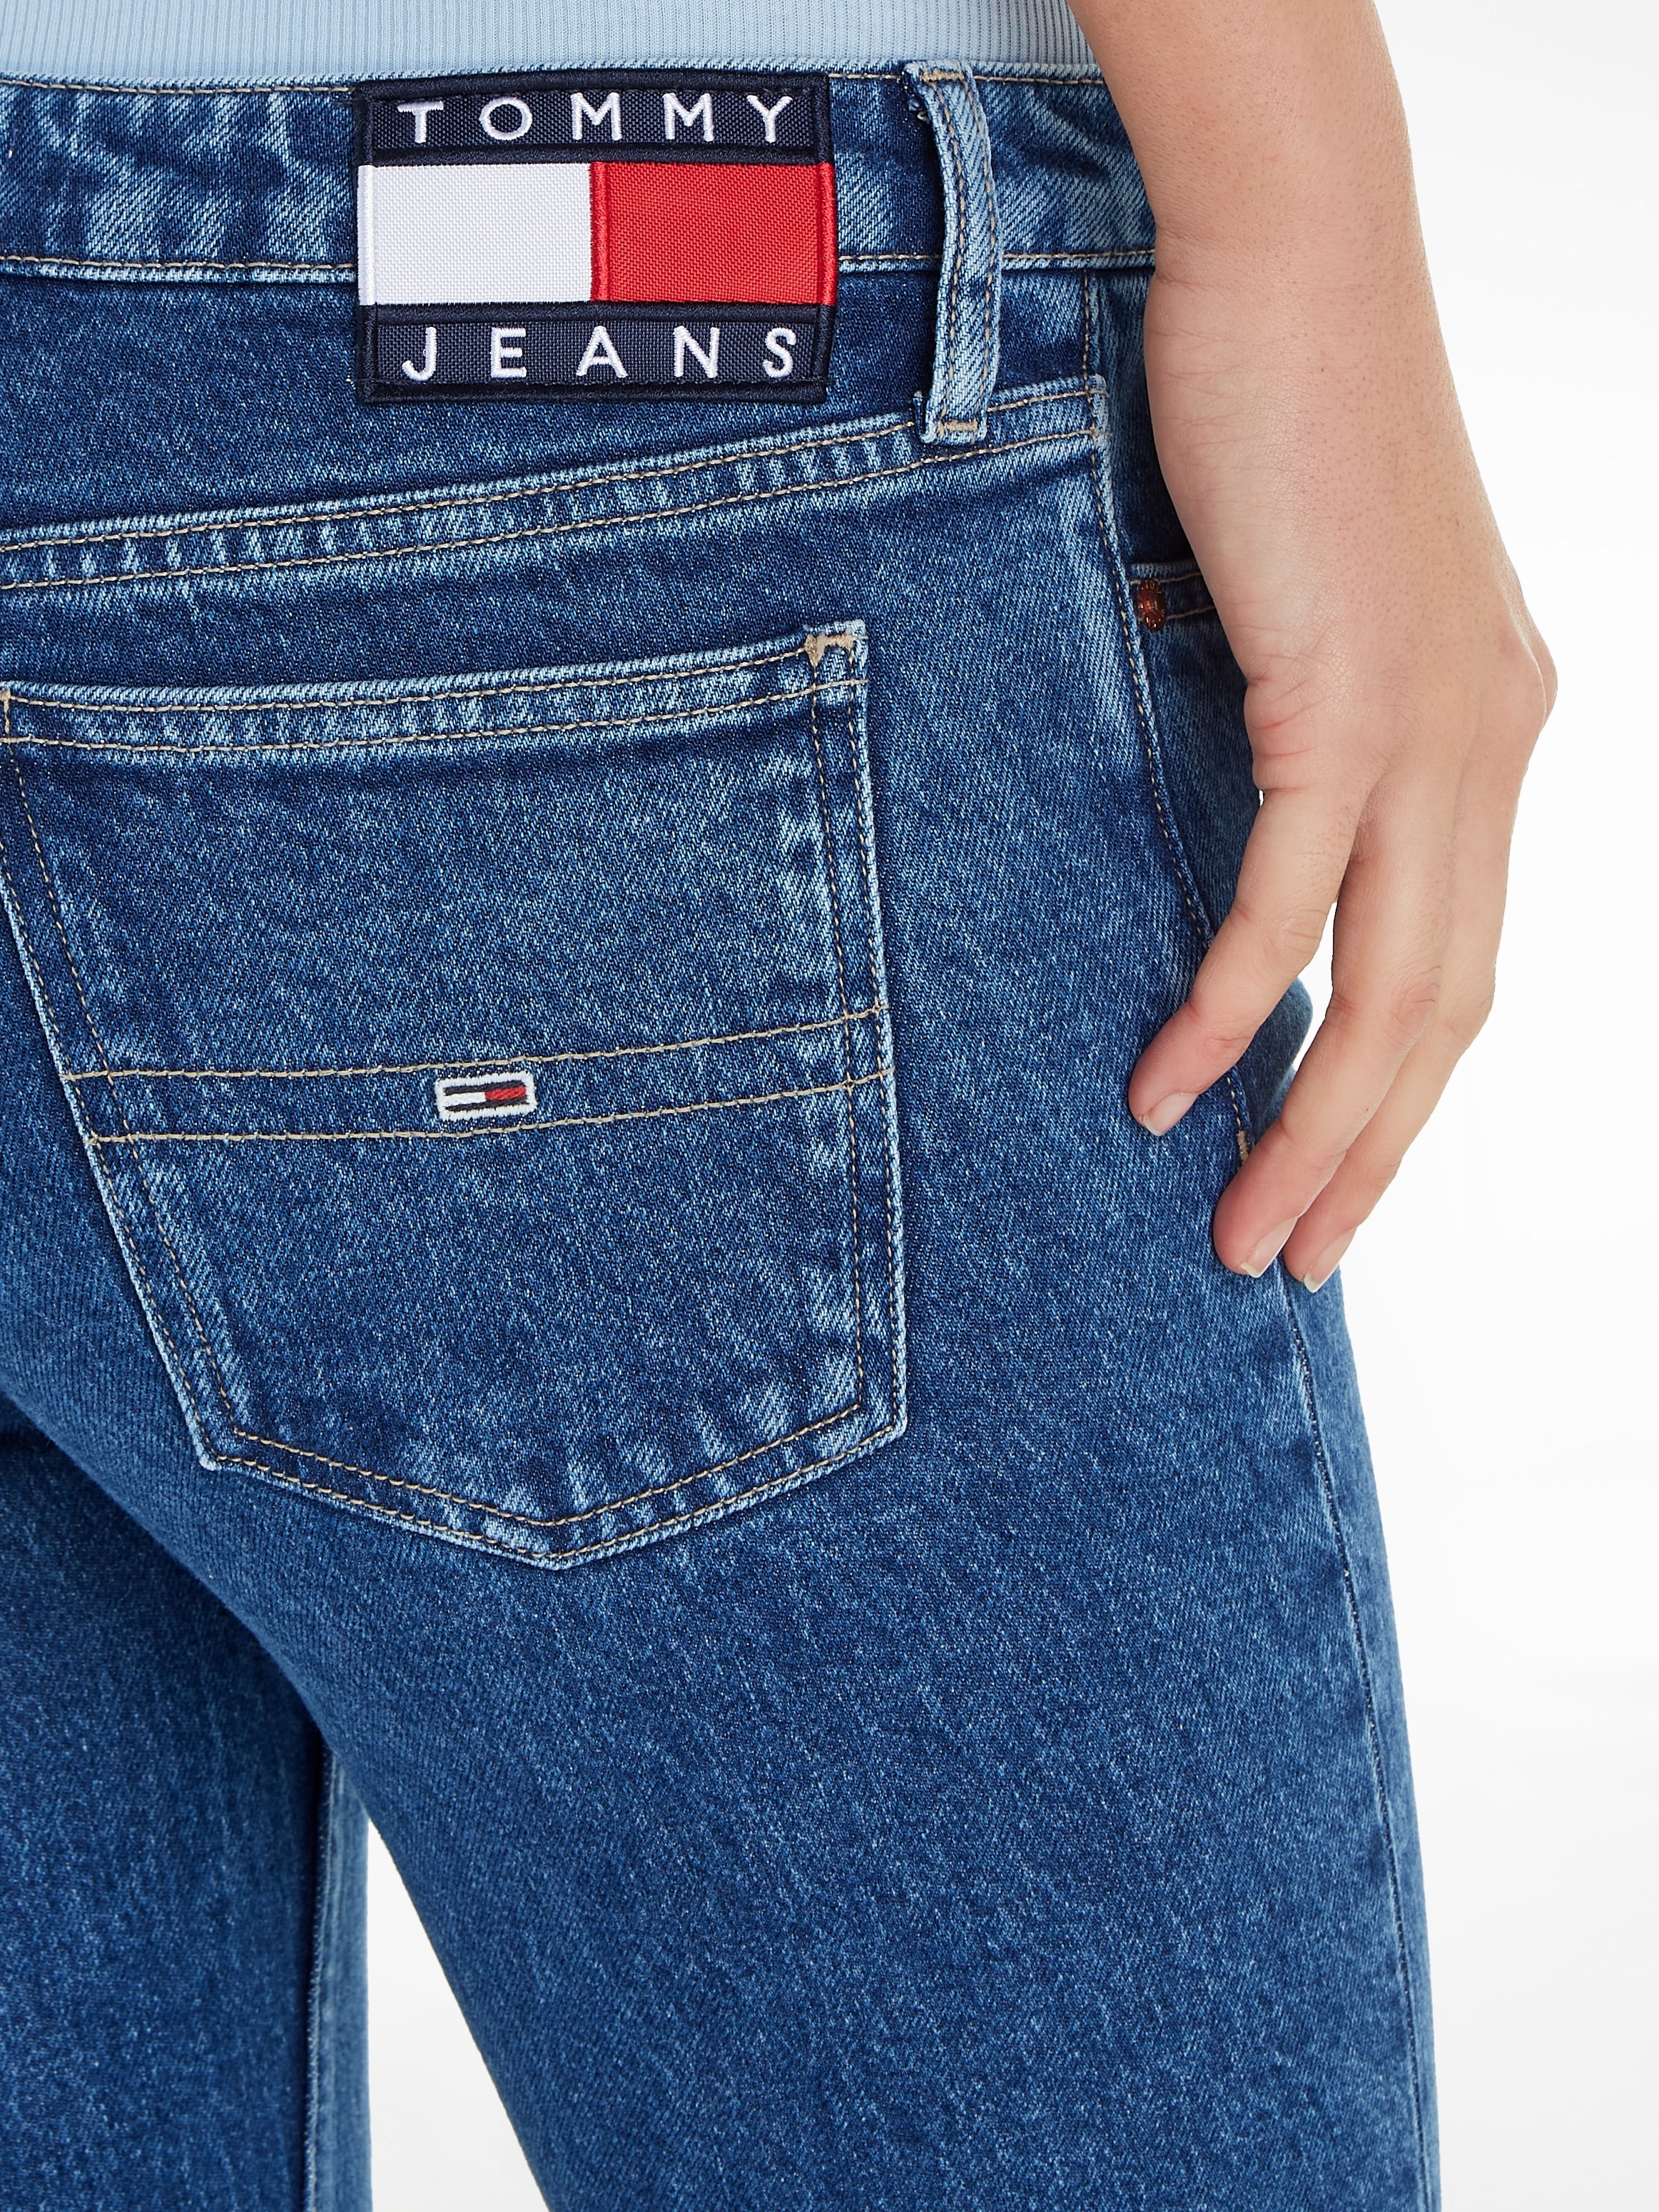 Schlagjeans, Logobadge Jeans mit Jeans Tommy Tommy ♕ bei